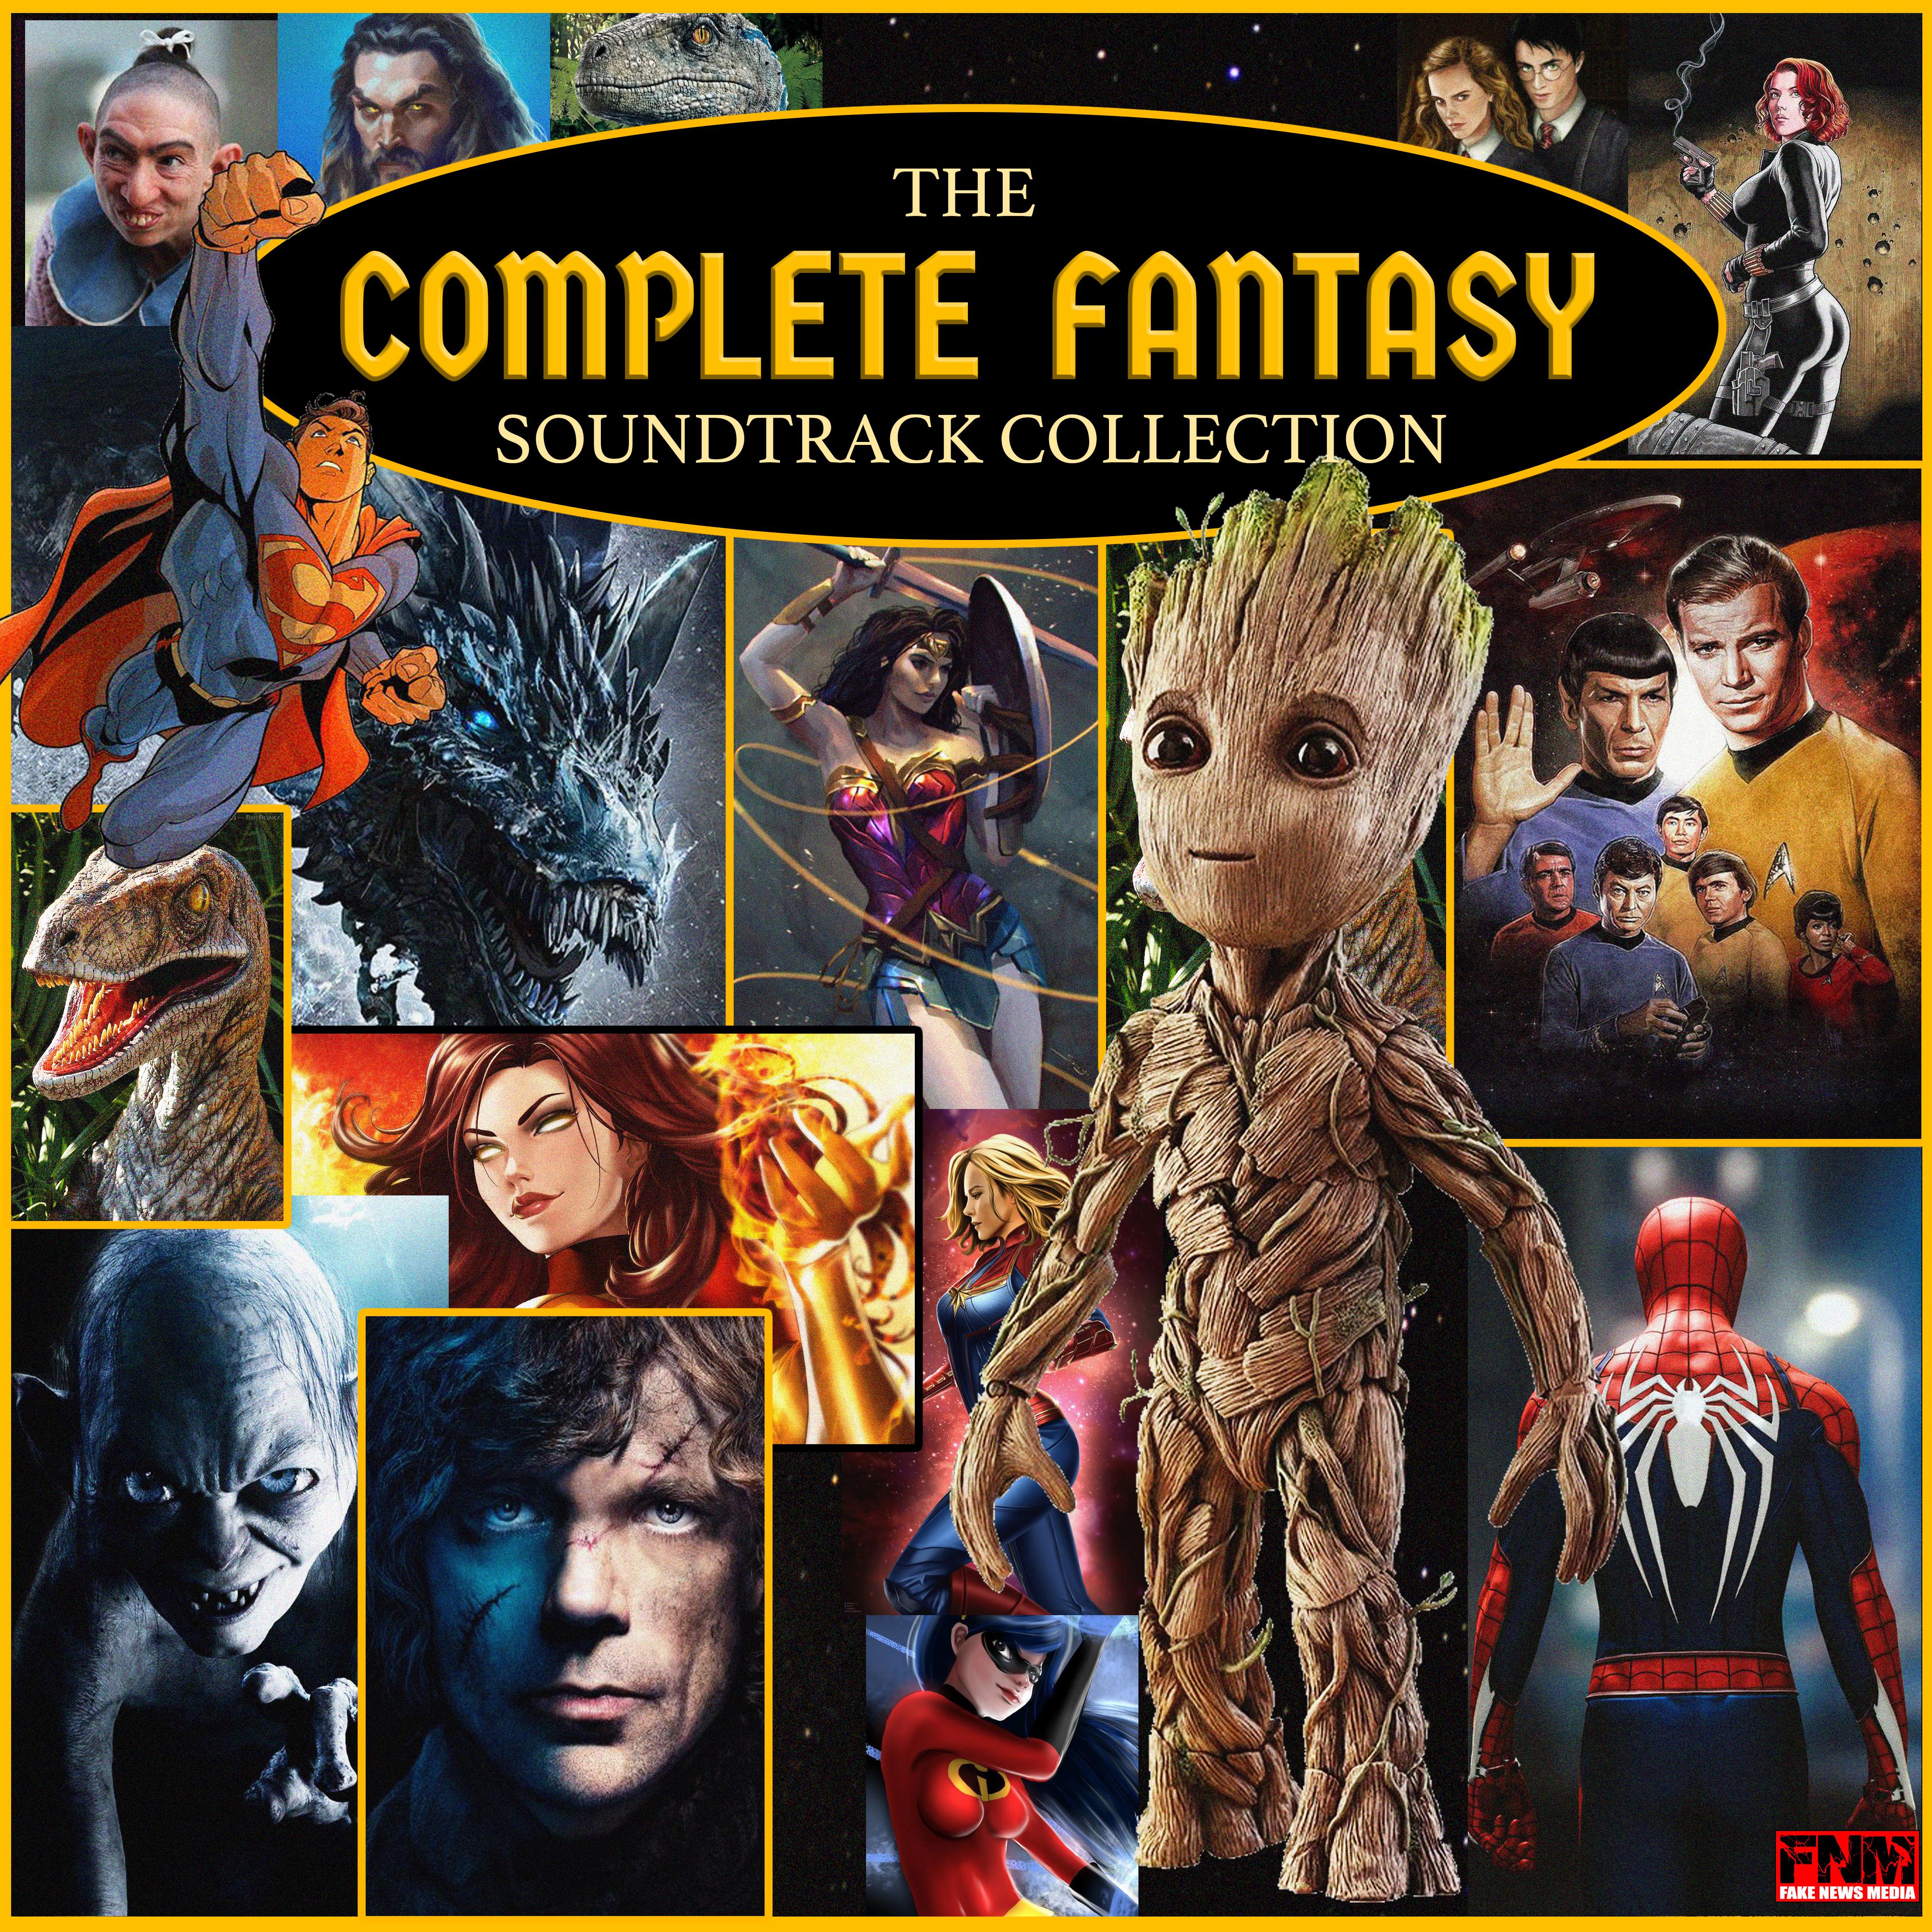 The Complete Fantasy Soundtrack Collection